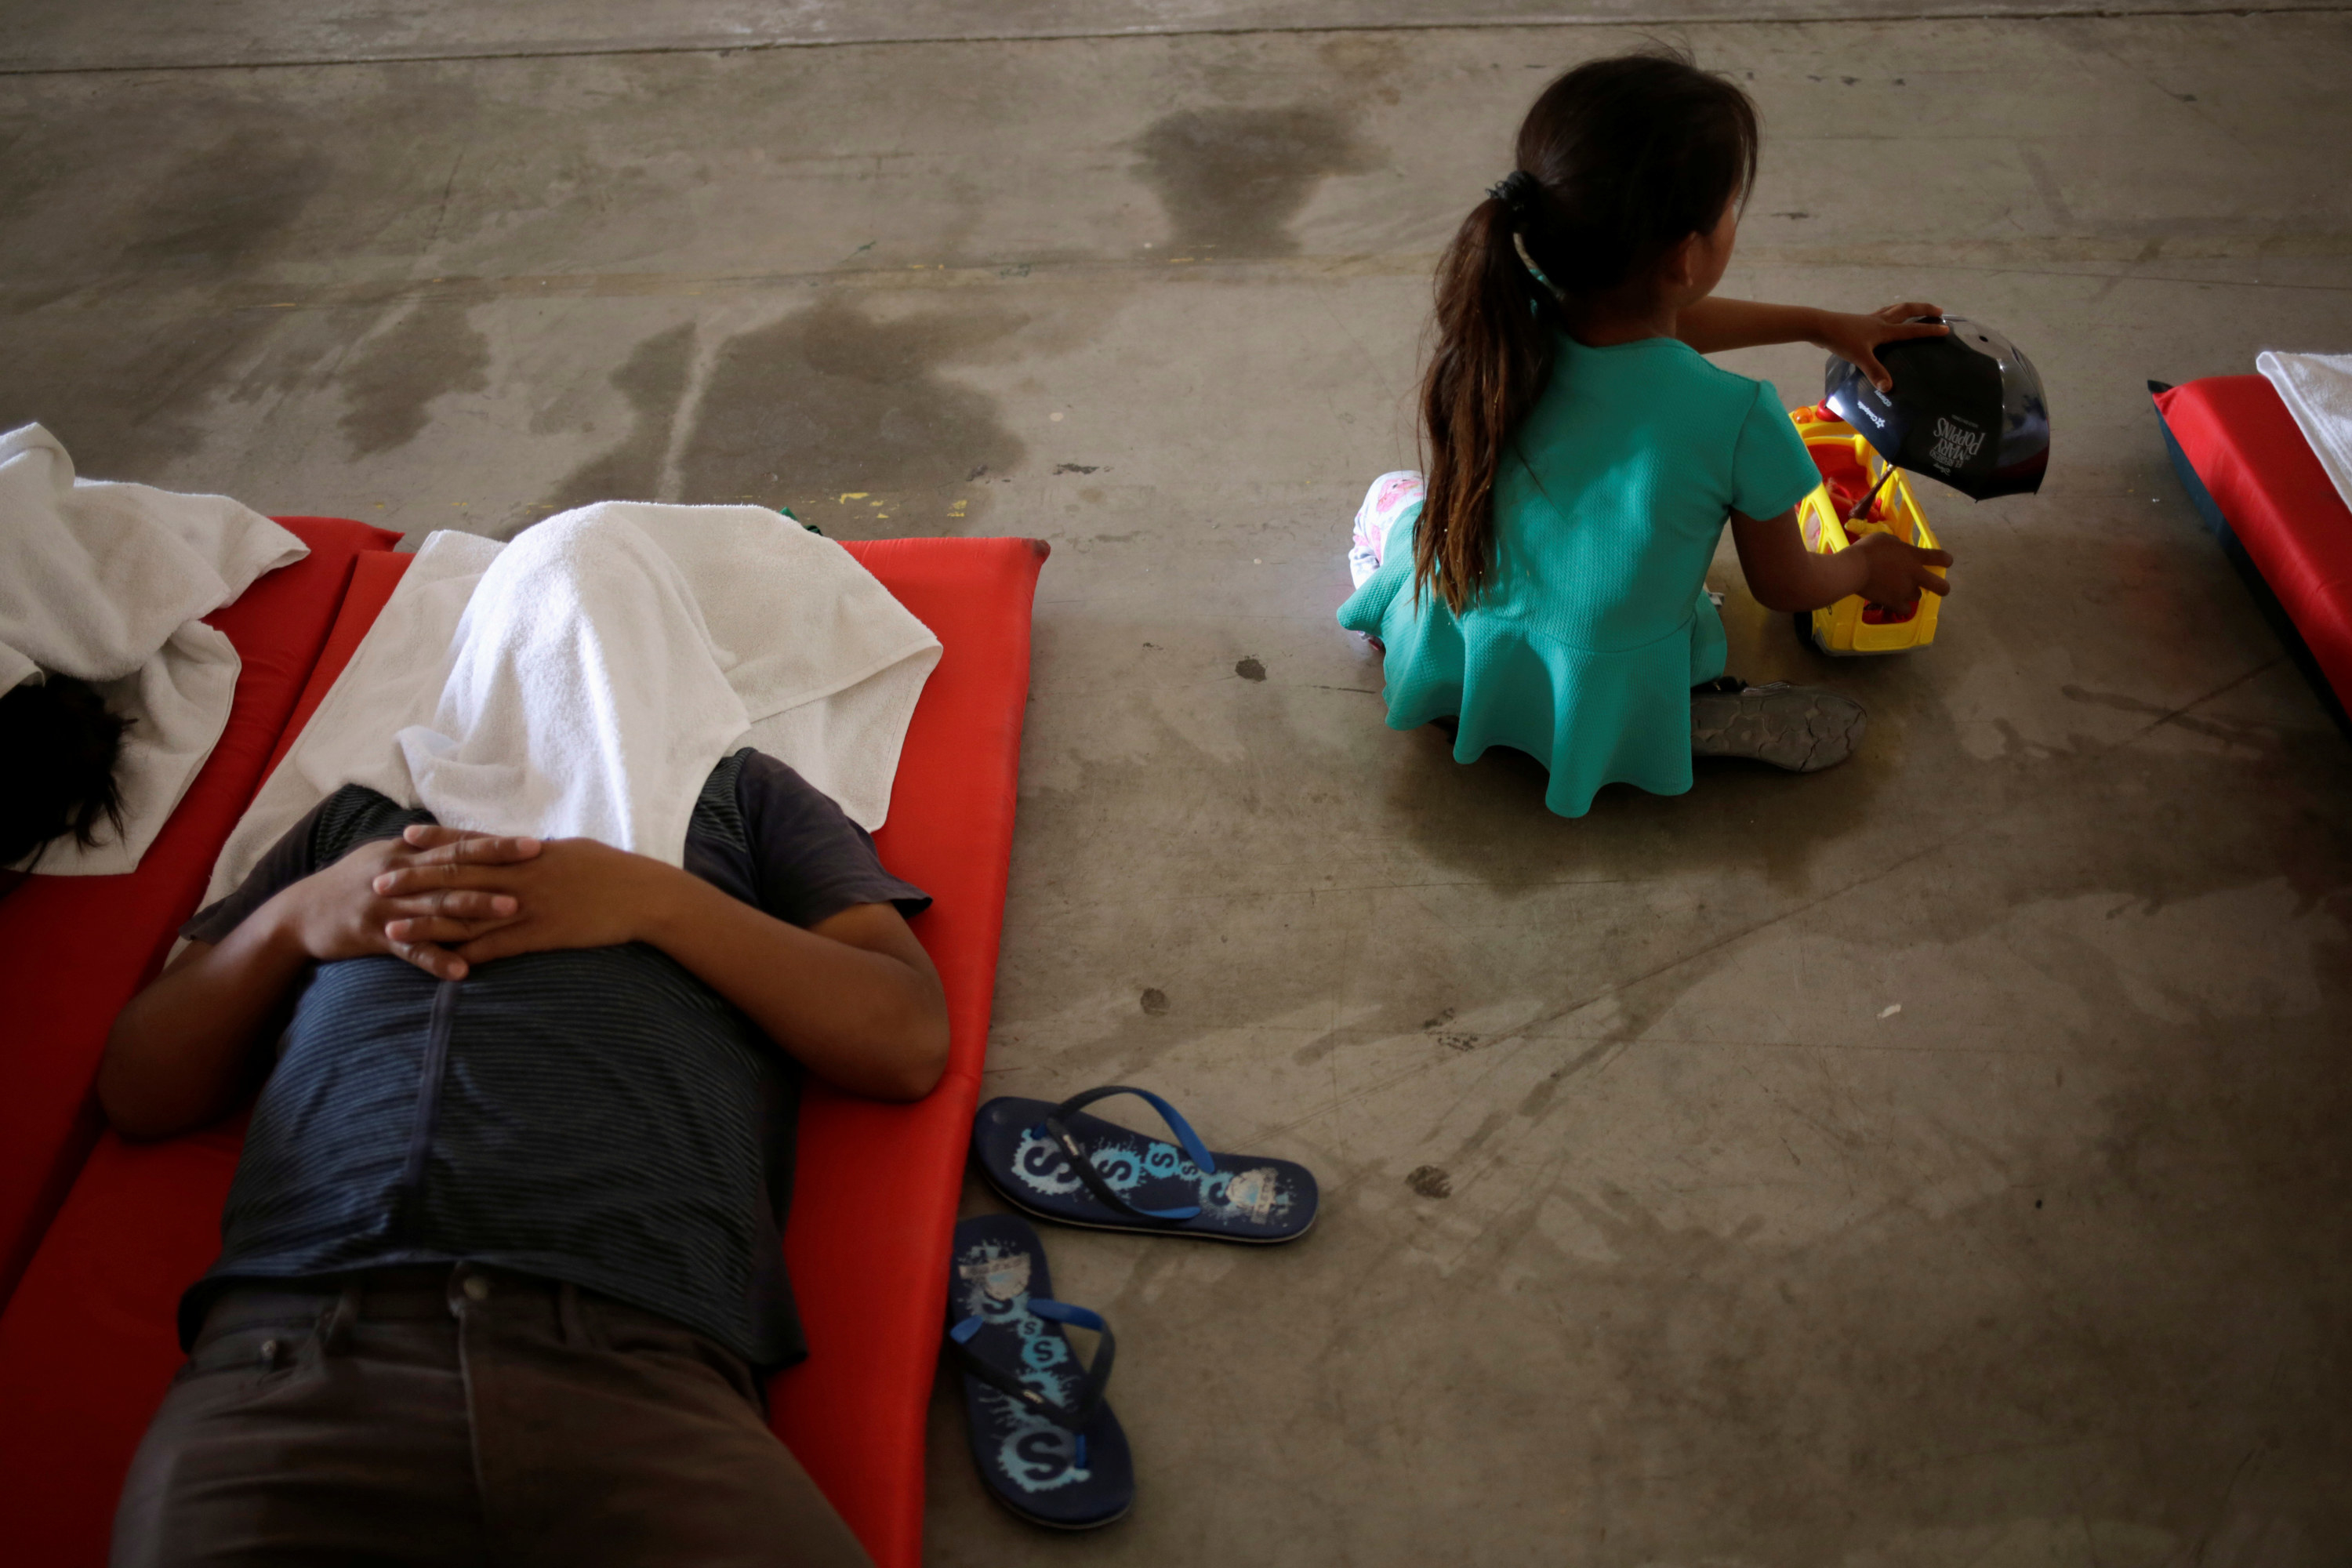 A little girl sits on the floor, and a person lies on a cot with a cloth over their face